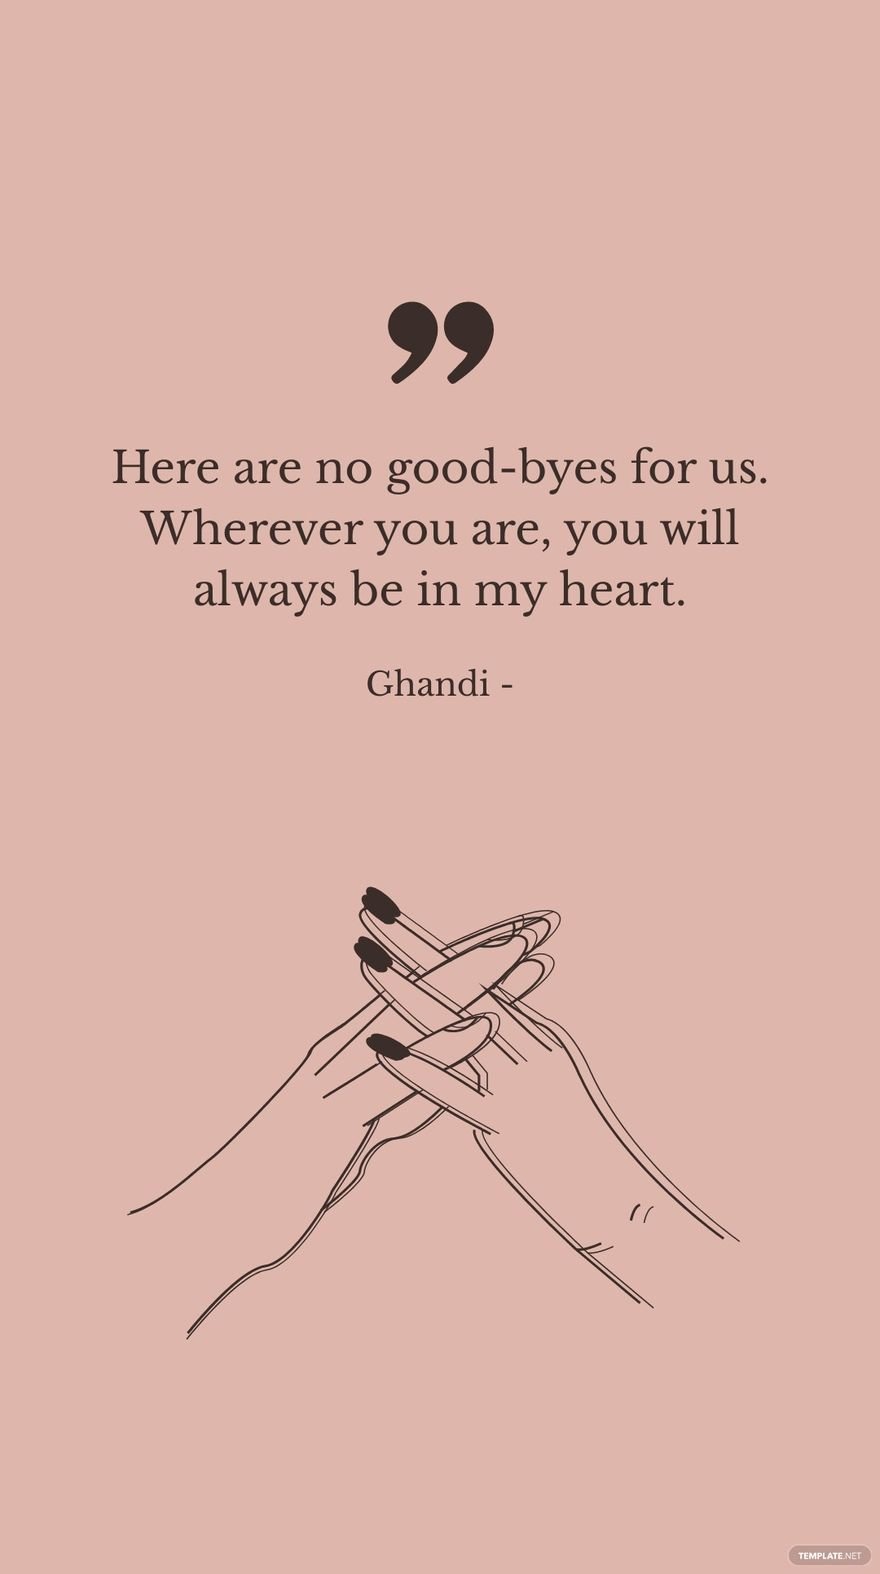 Ghandi - Here are no good-byes for us. Wherever you are, you will always be in my heart.